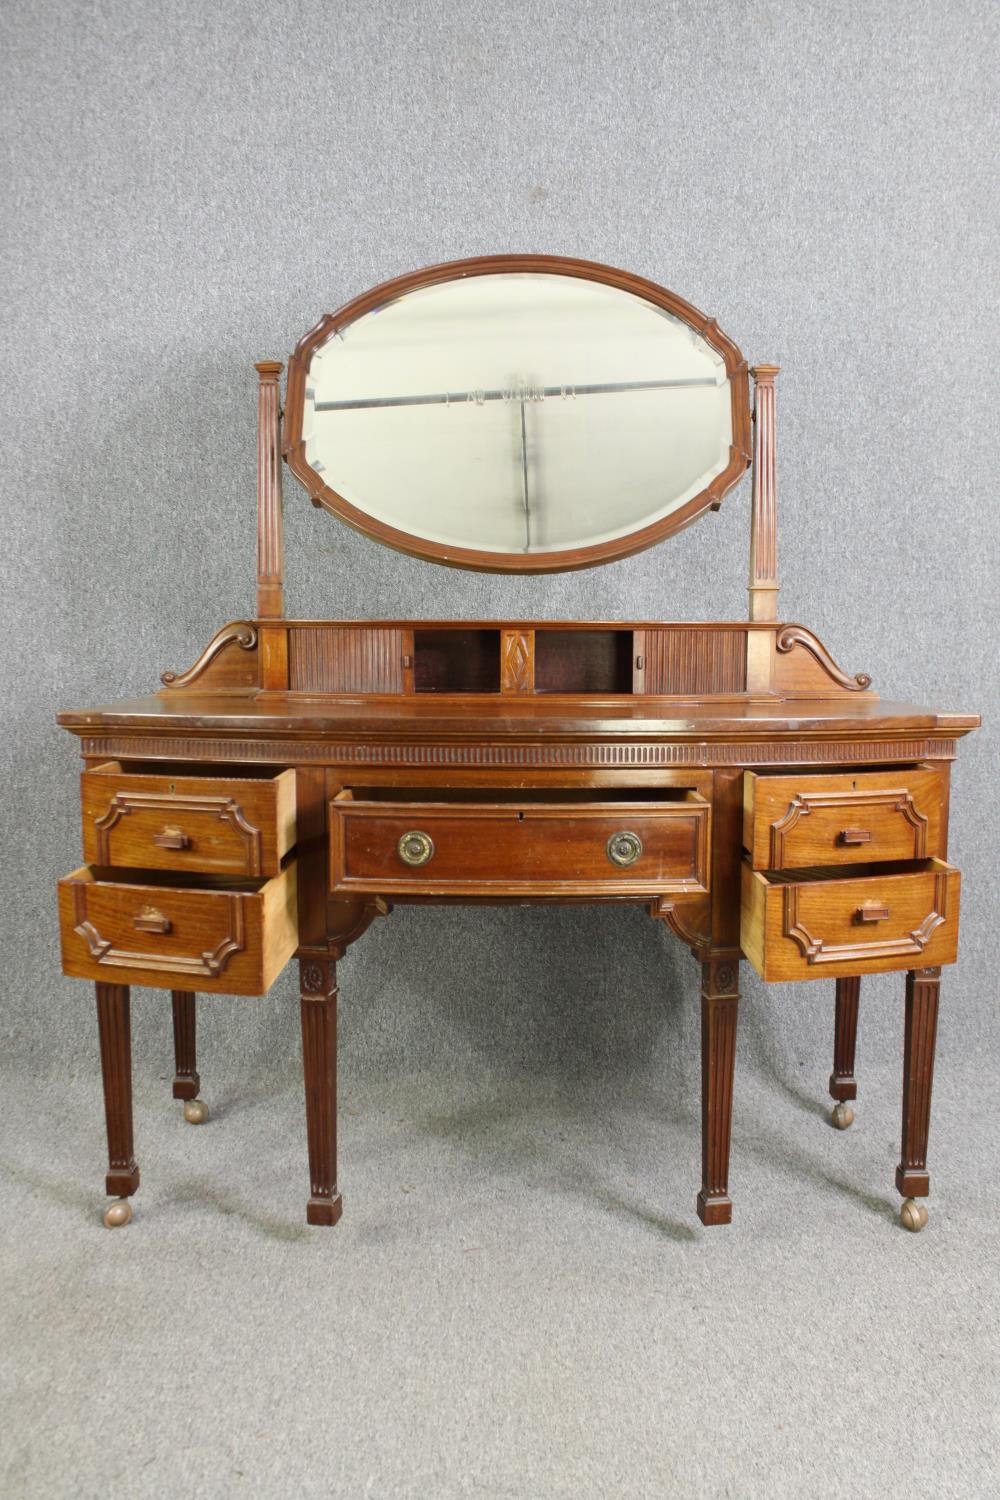 A George III style walnut dressing table, 20th century. H.164 W.136 D.63cm. - Image 2 of 10